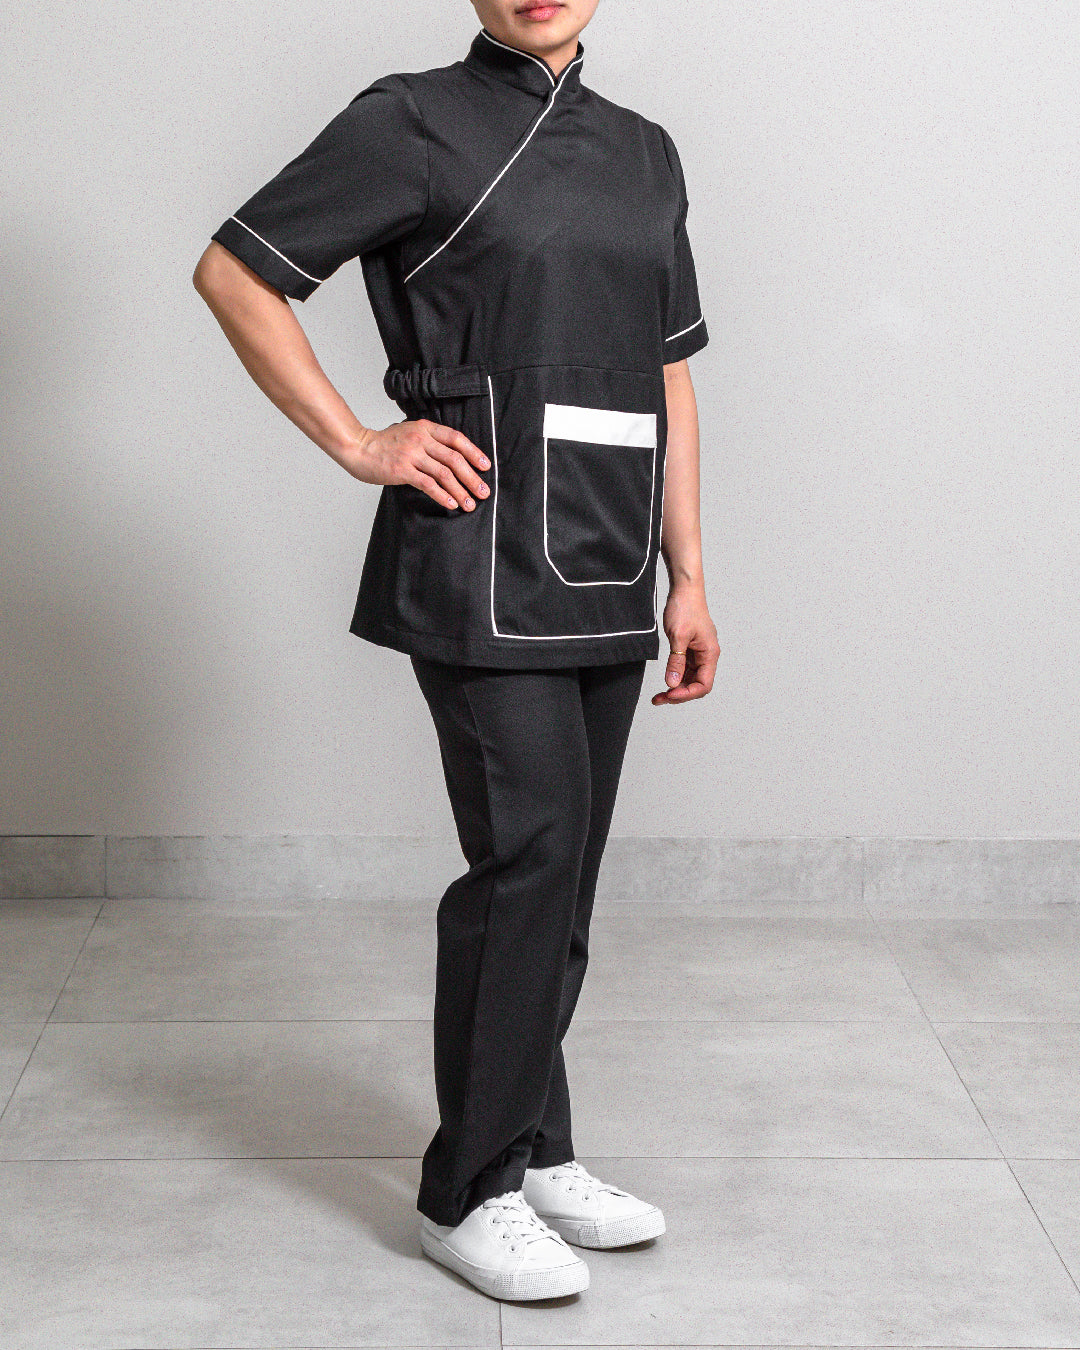 HOP Couture | Tokyo | Black.Offwhite